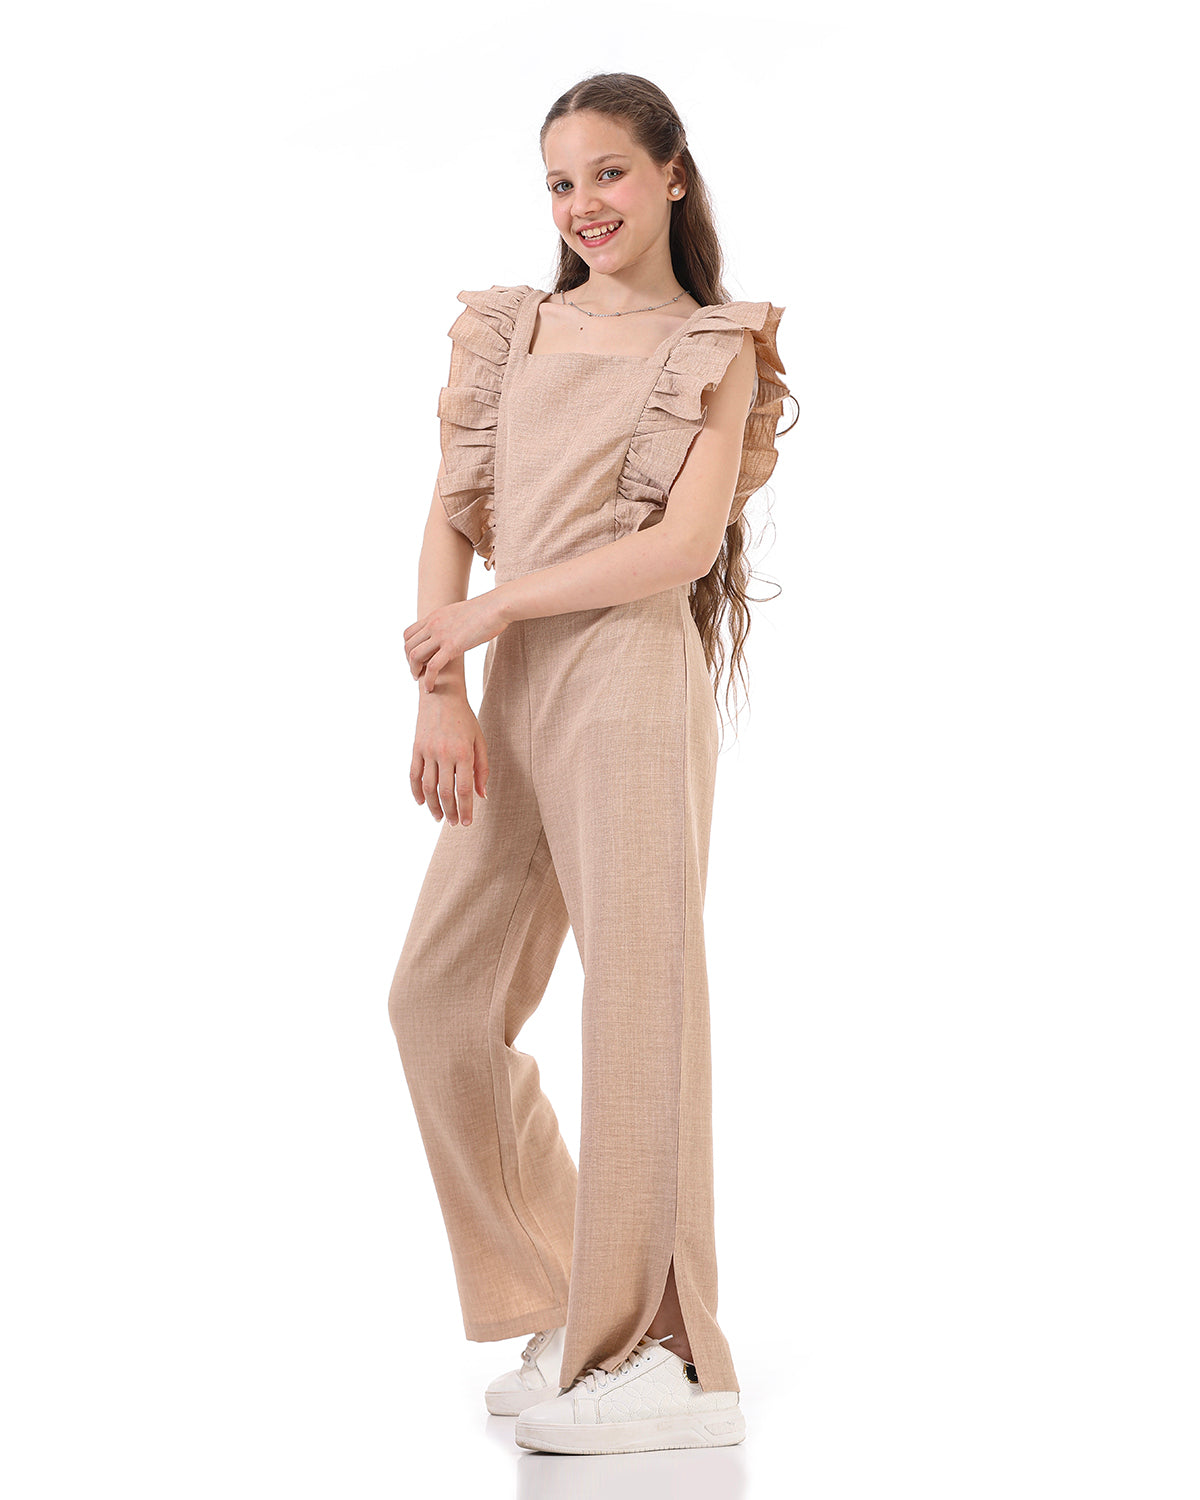 Casual Ruffle Beige Jumpsuits For Girls